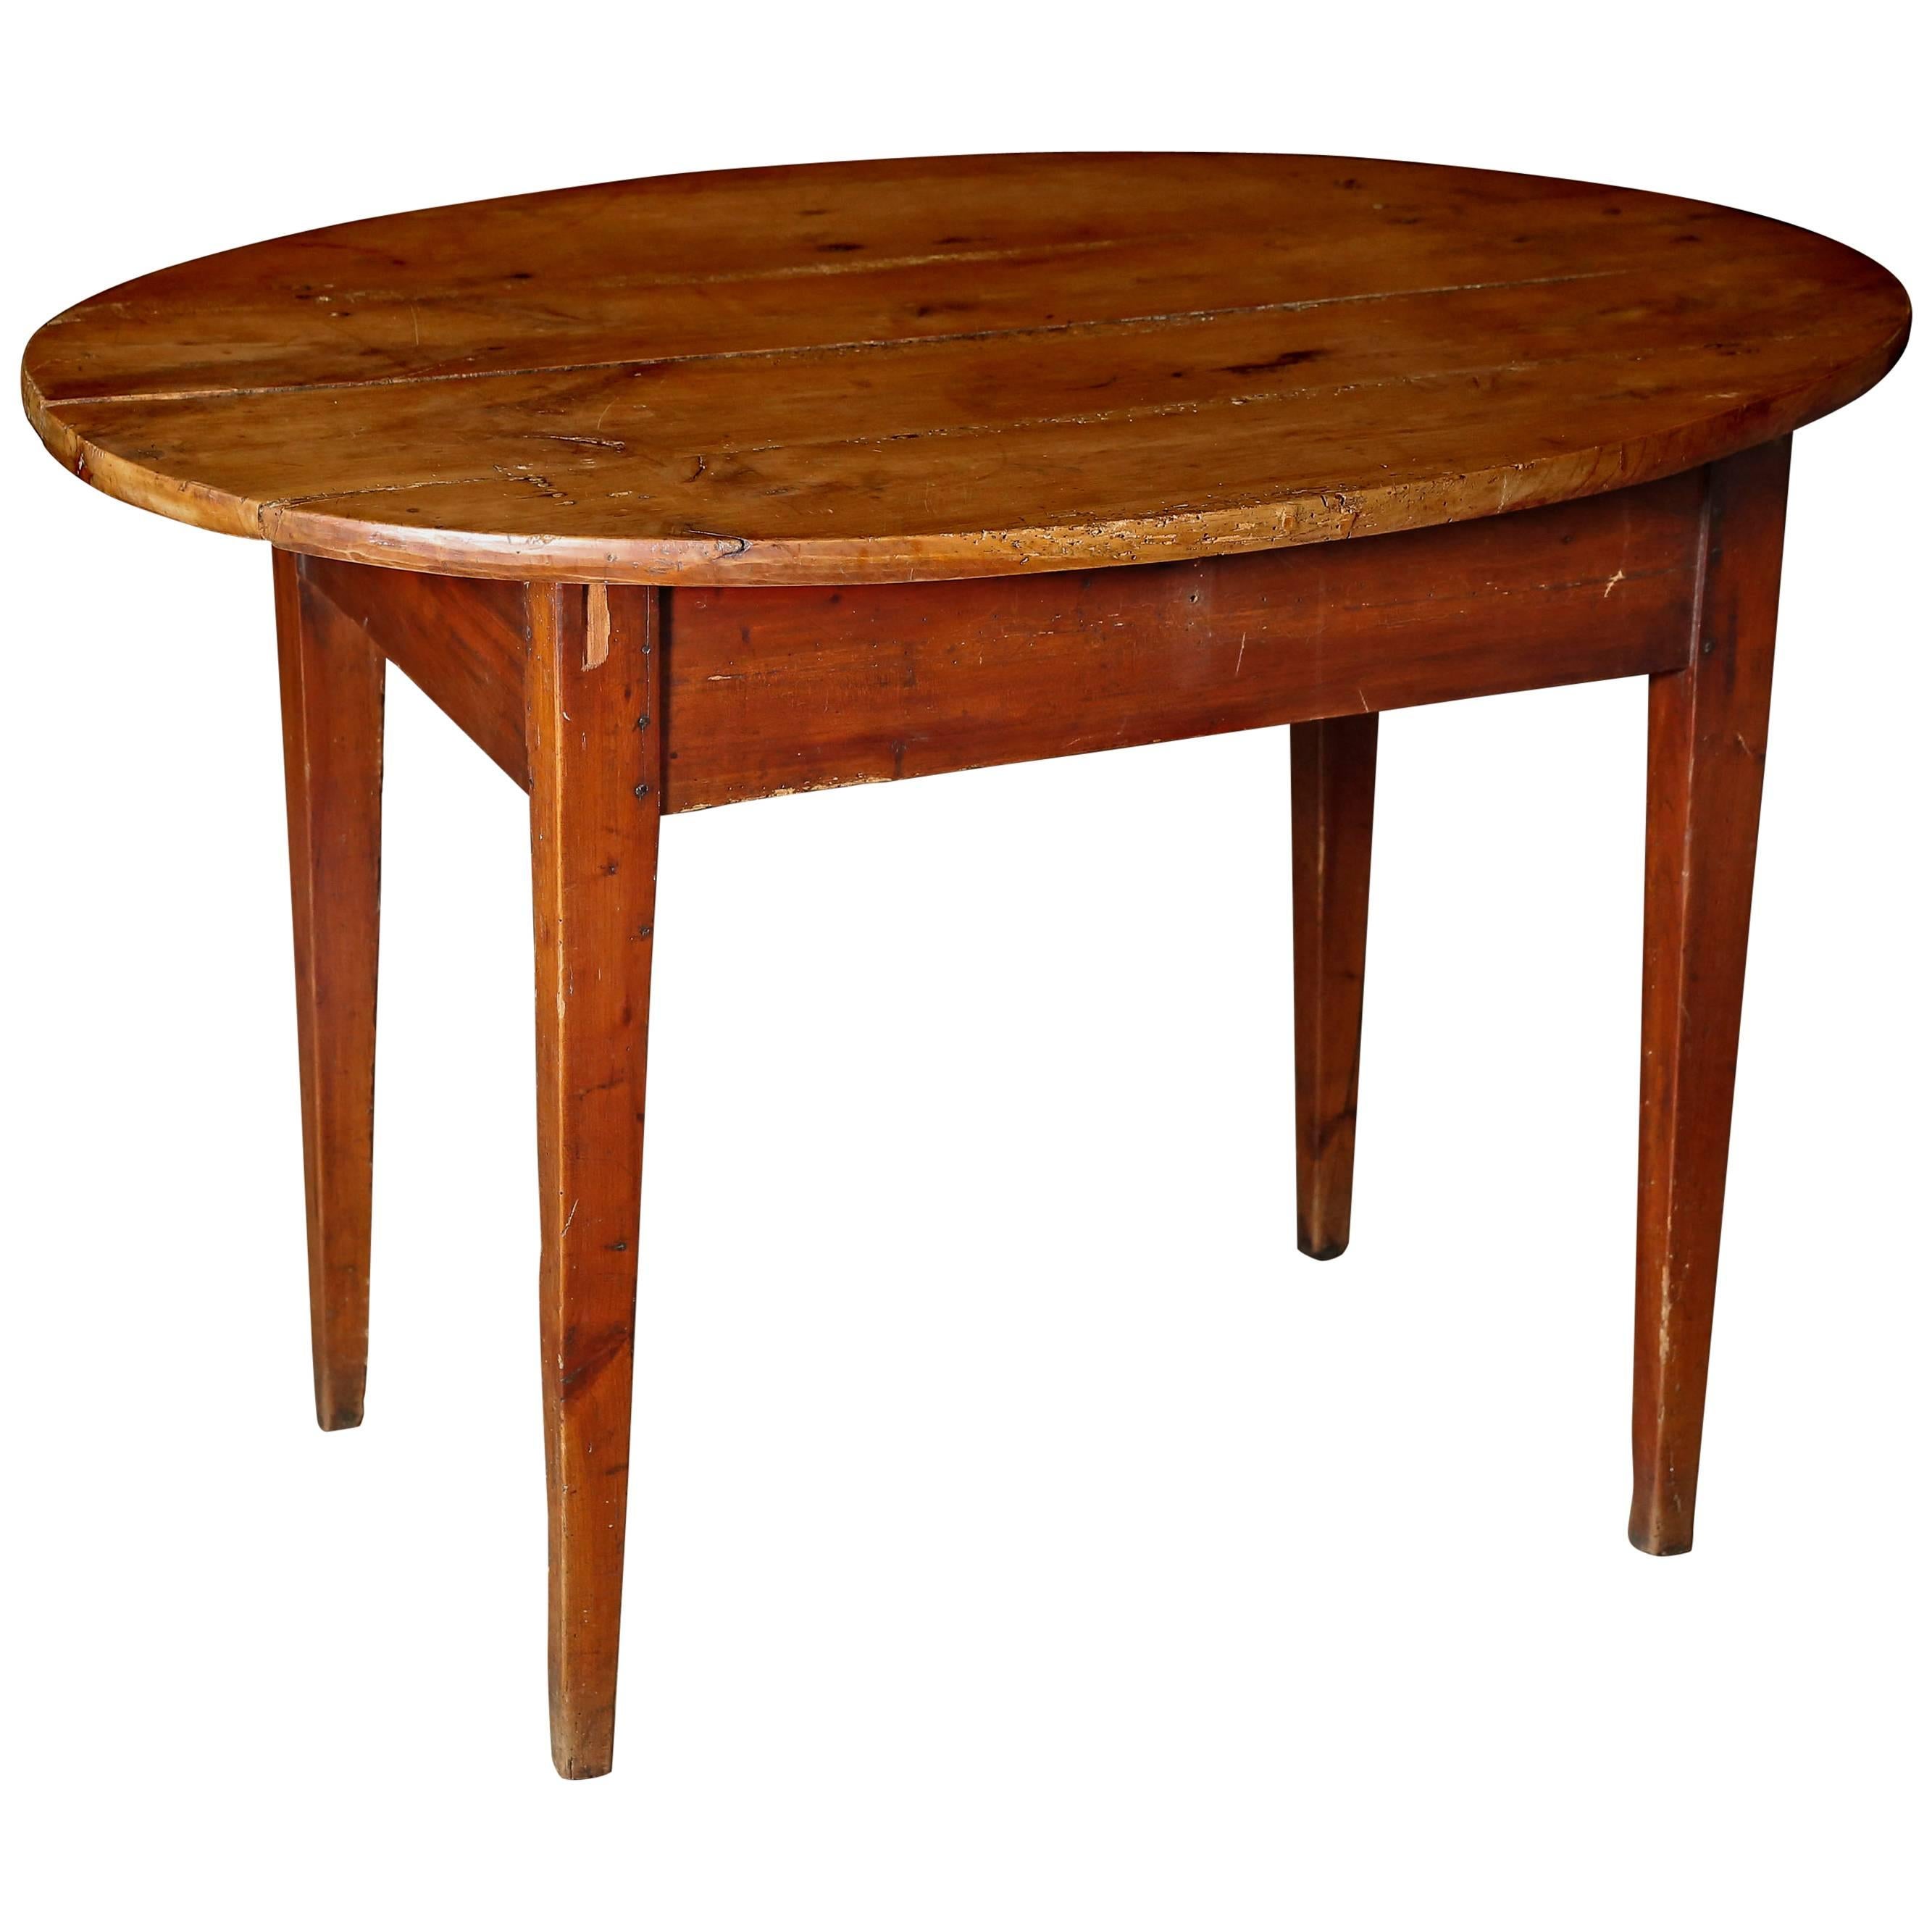 Antique 19th Century Cherry Oval Table For Sale